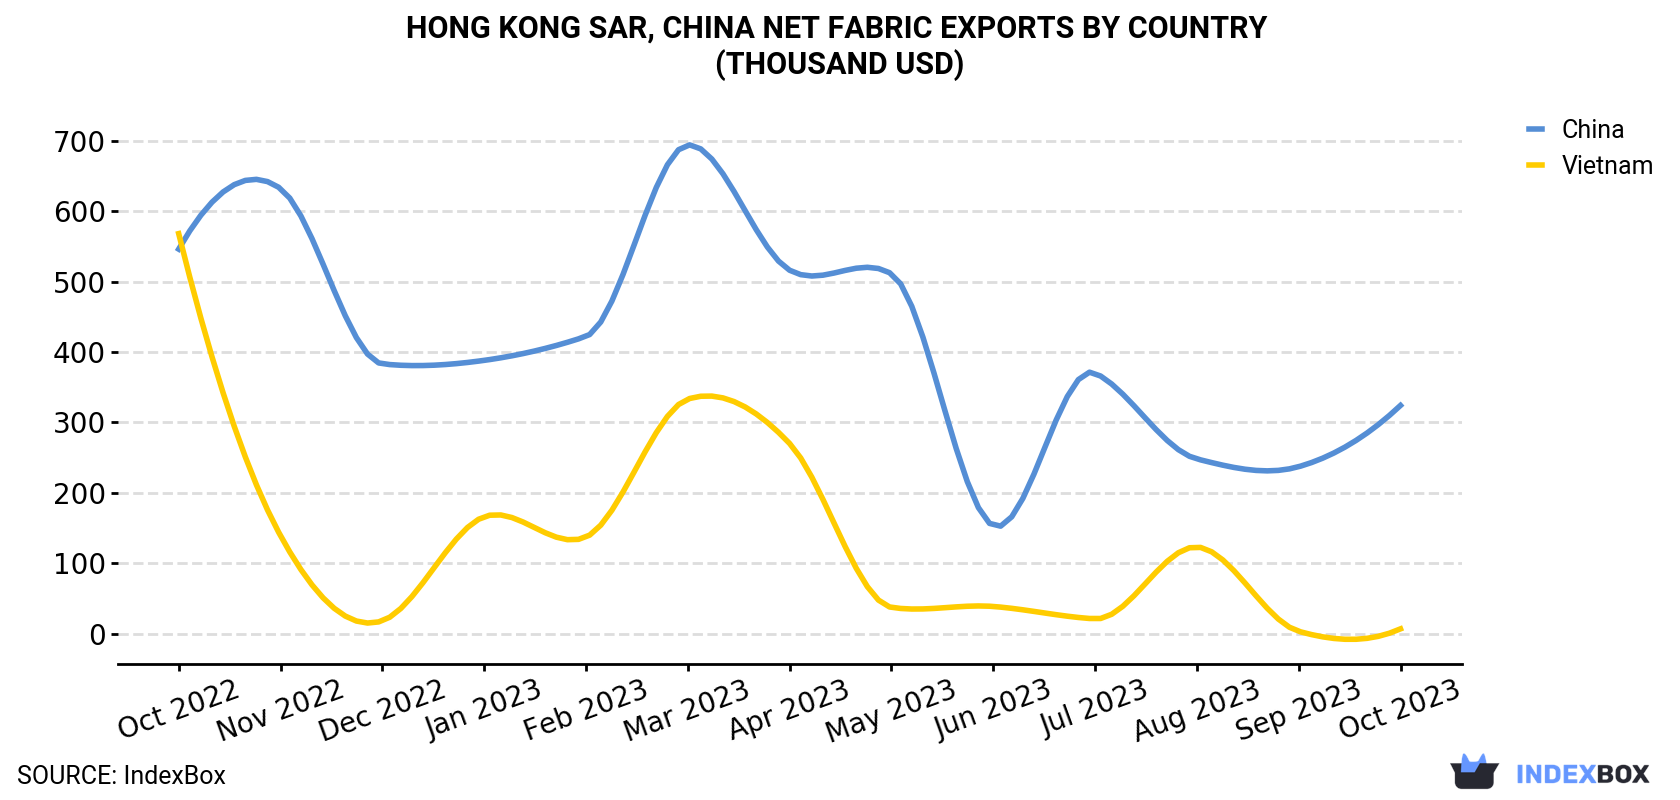 Hong Kong Net Fabric Exports By Country (Thousand USD)